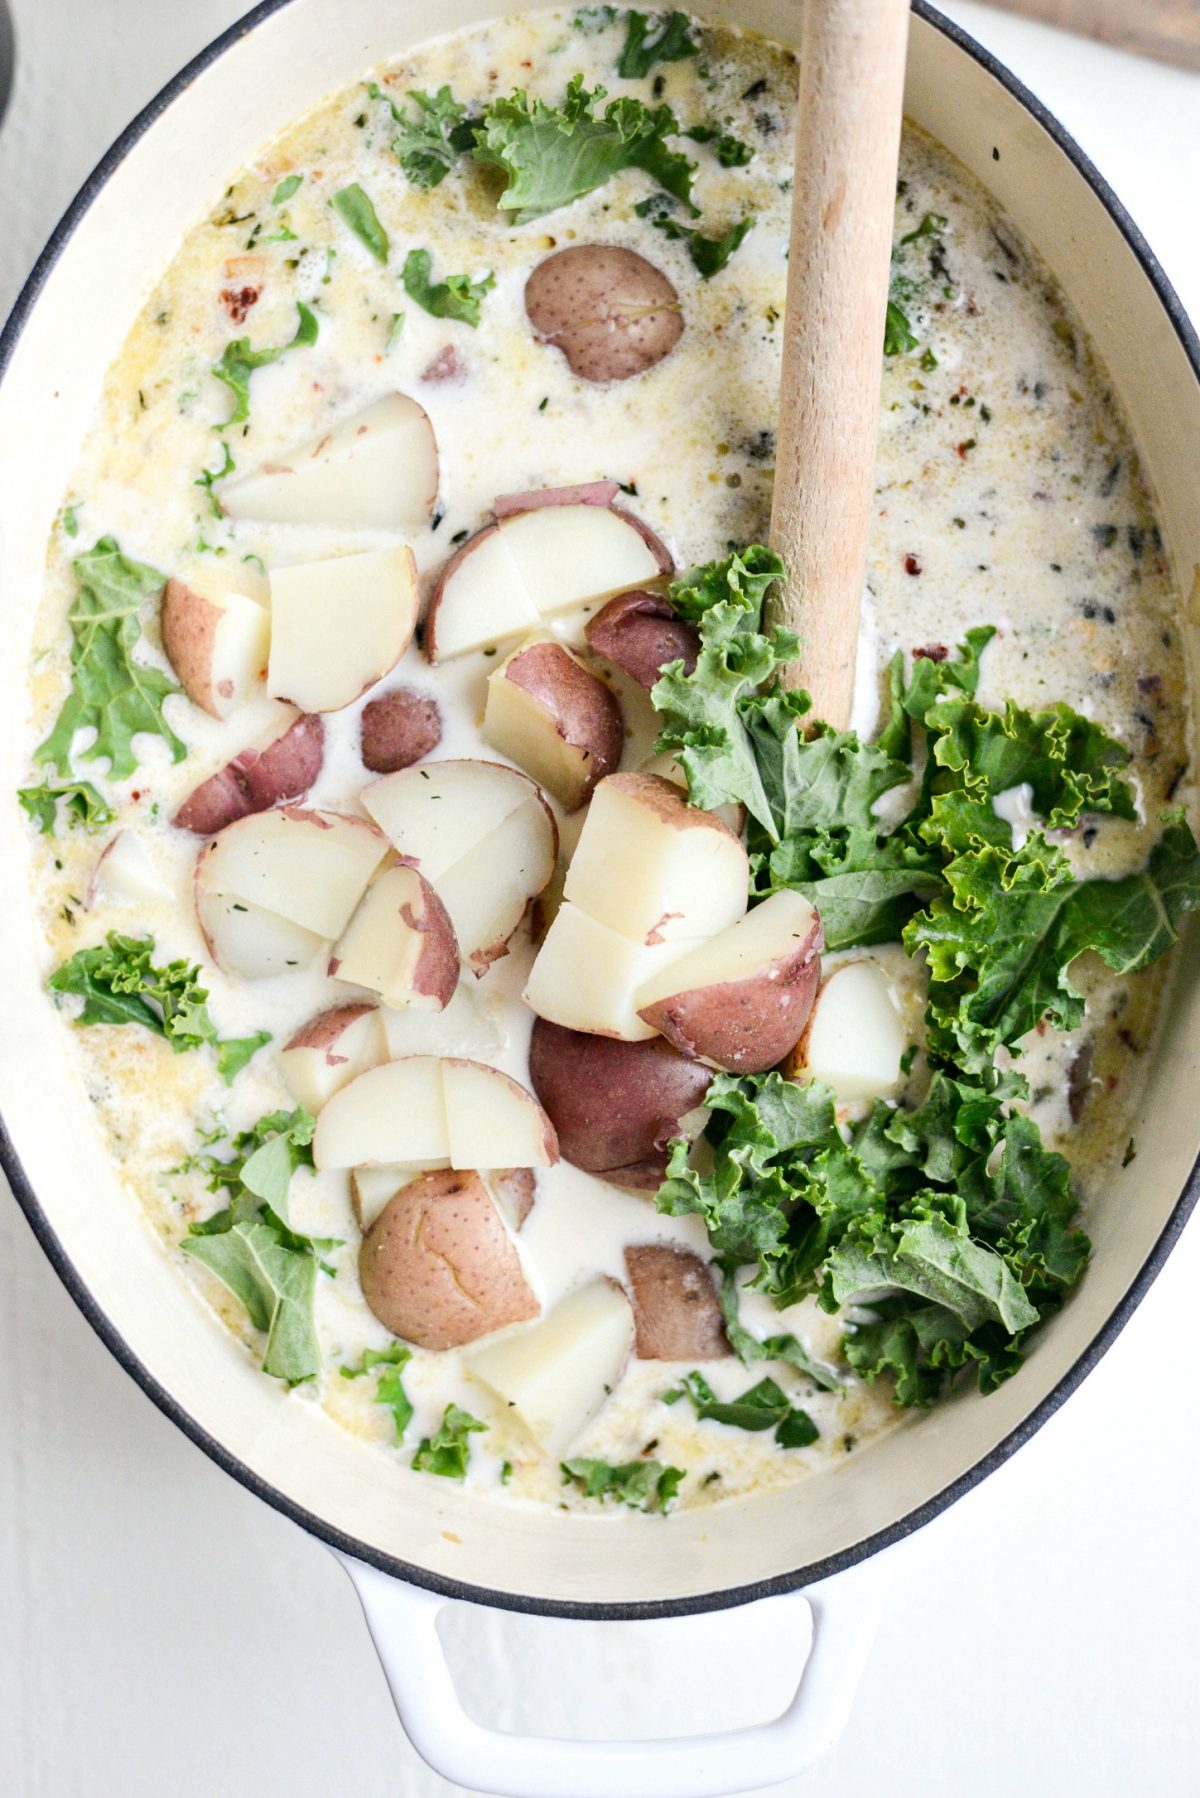 Add in diced potatoes and kale. Heat the potatoes through and wilt the kale.